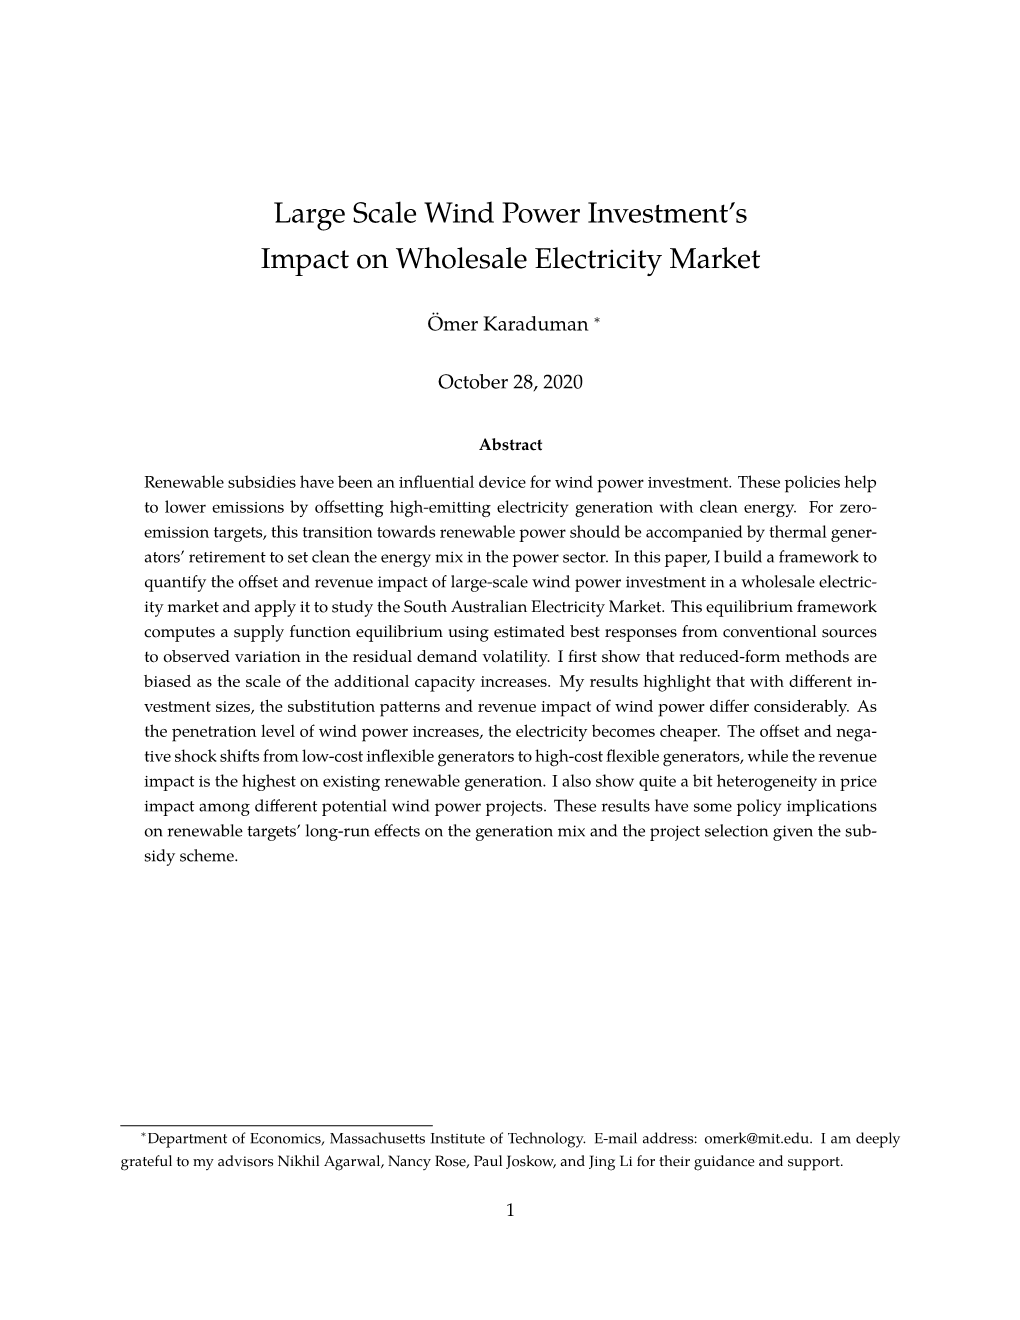 Large Scale Wind Power Investment's Impact on Wholesale Electricity